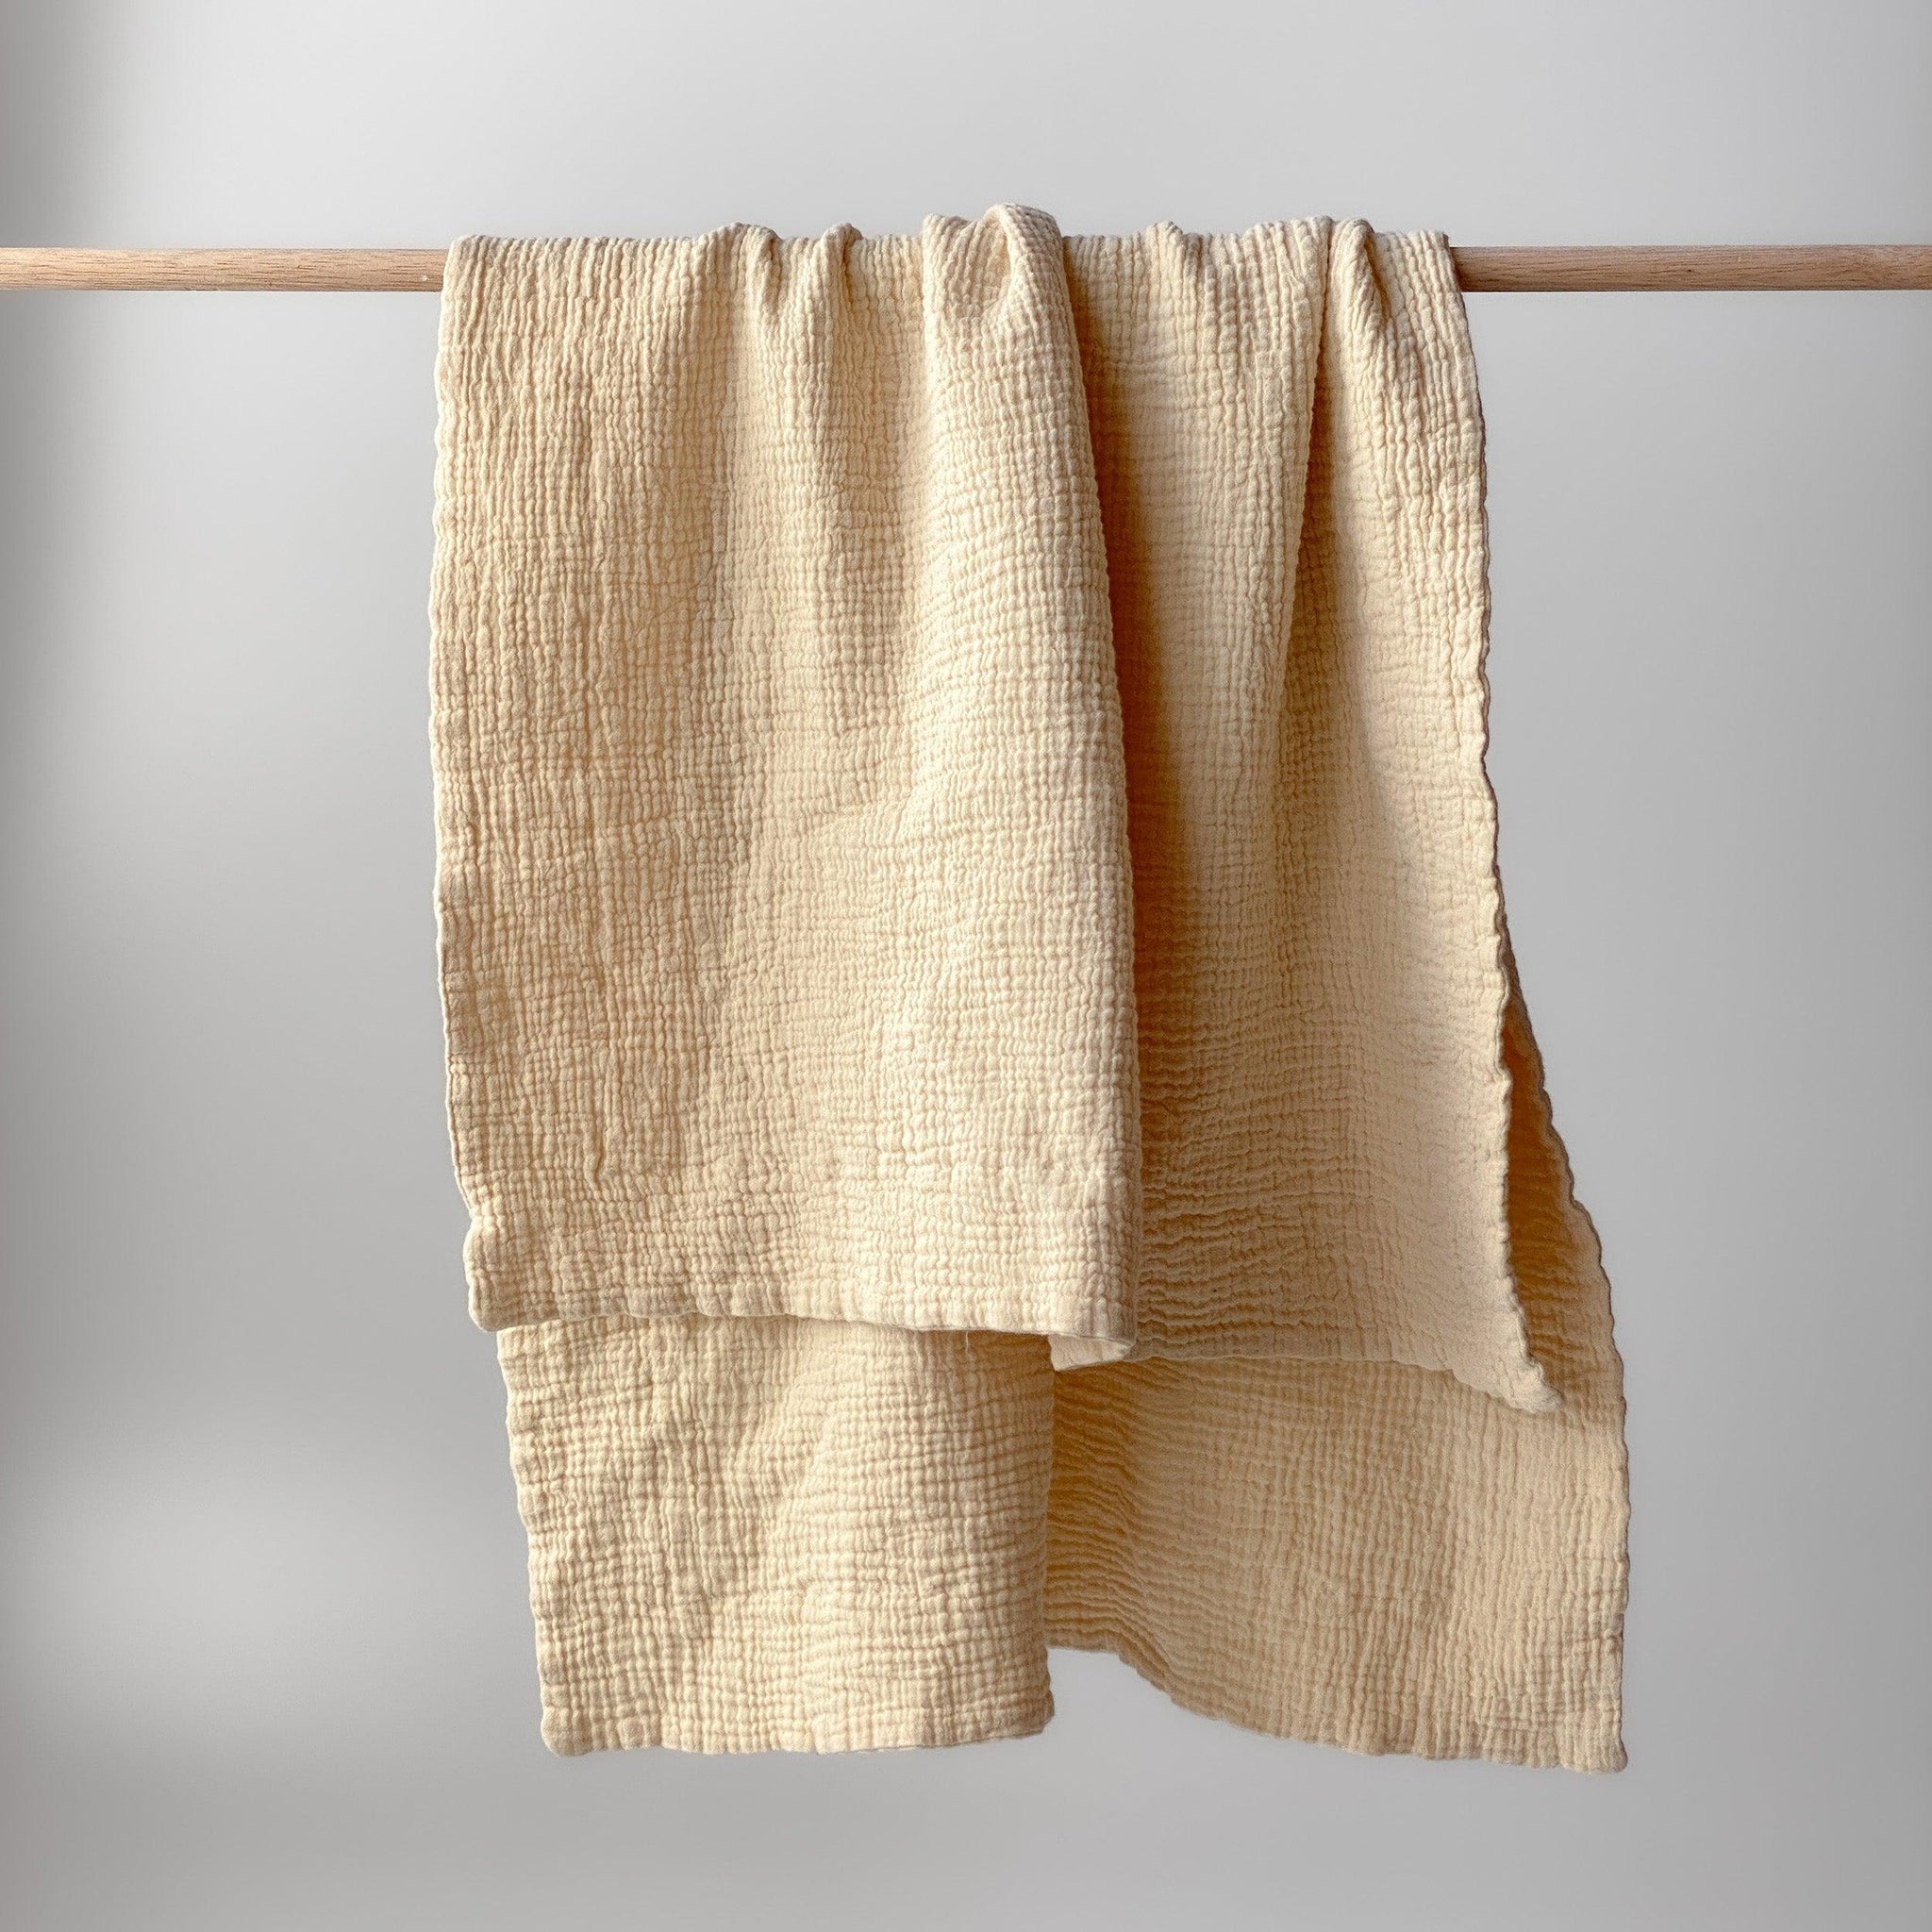 Thick Cotton Muslin Towel - MEDIUM 24X40 - Many Colors Available - Charley Charles